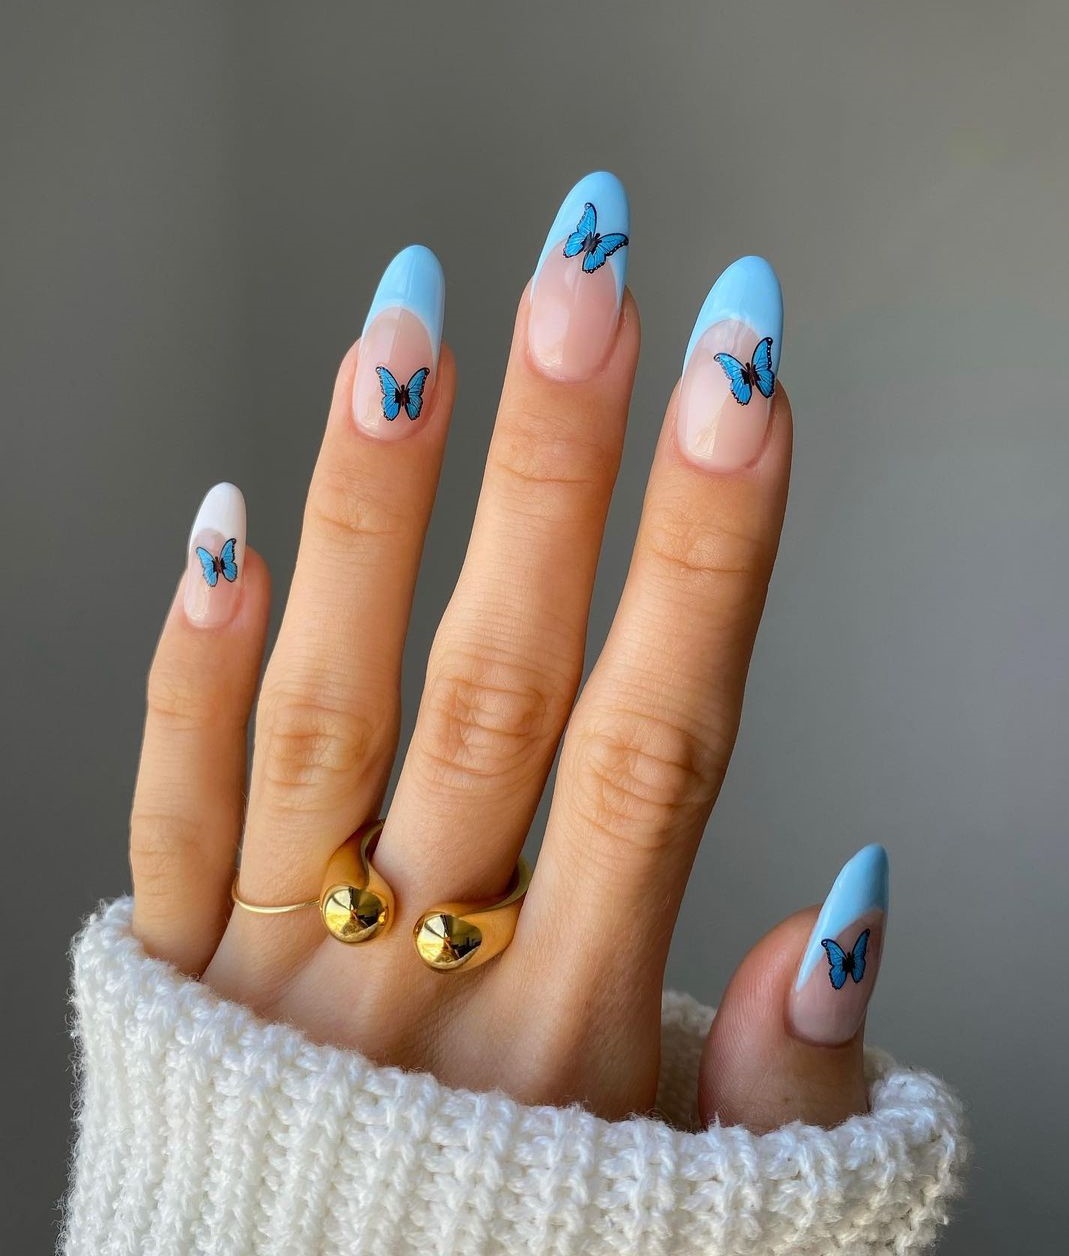 Long Oval French Nails with Blue Butterflies